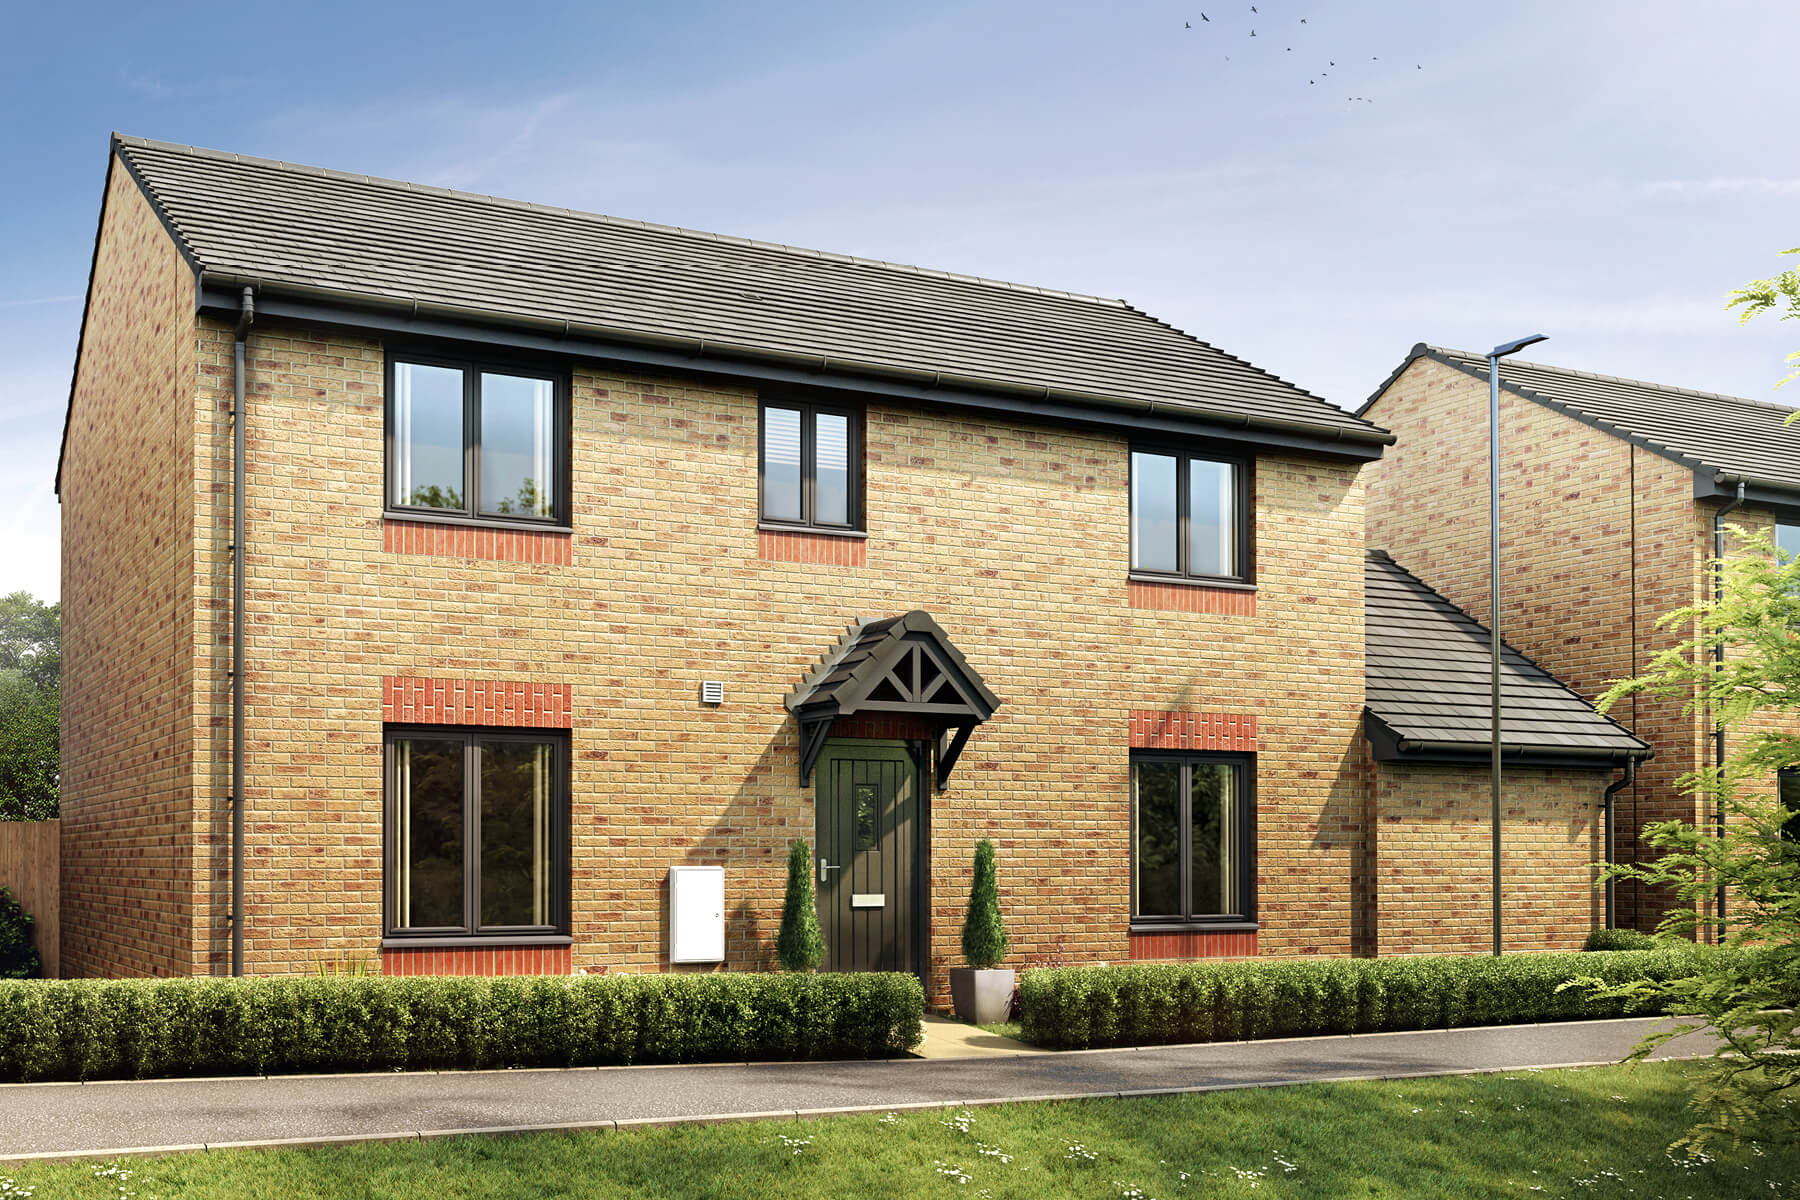 Plot 198 4 Bedroom Detached Overlooking Green Open Space At Mayfield Gardens In Exeter Taylor Wimpey